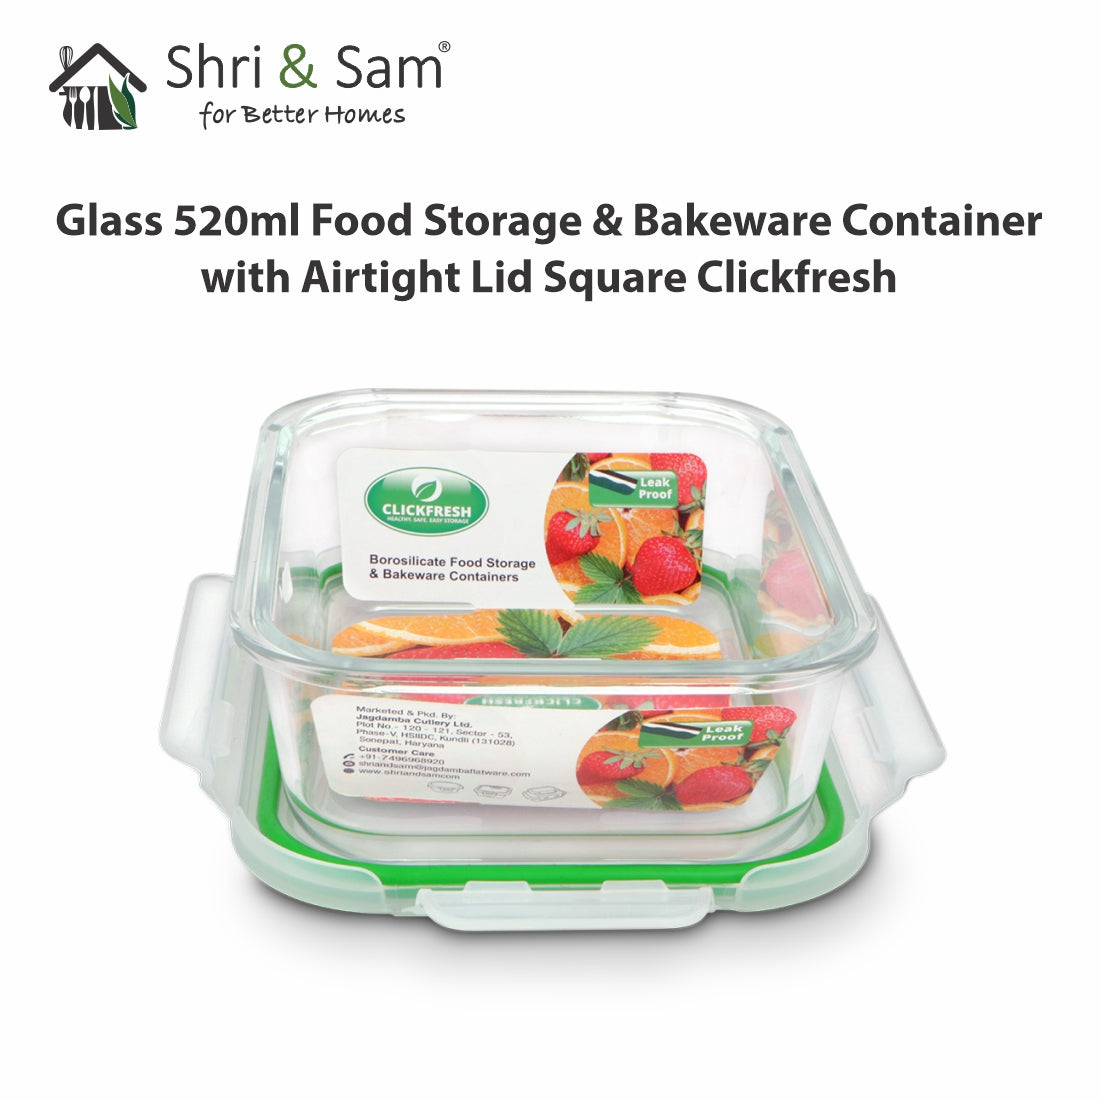 Glass 520ml Food Storage & Bakeware Container with Airtight Lid Square Clickfresh